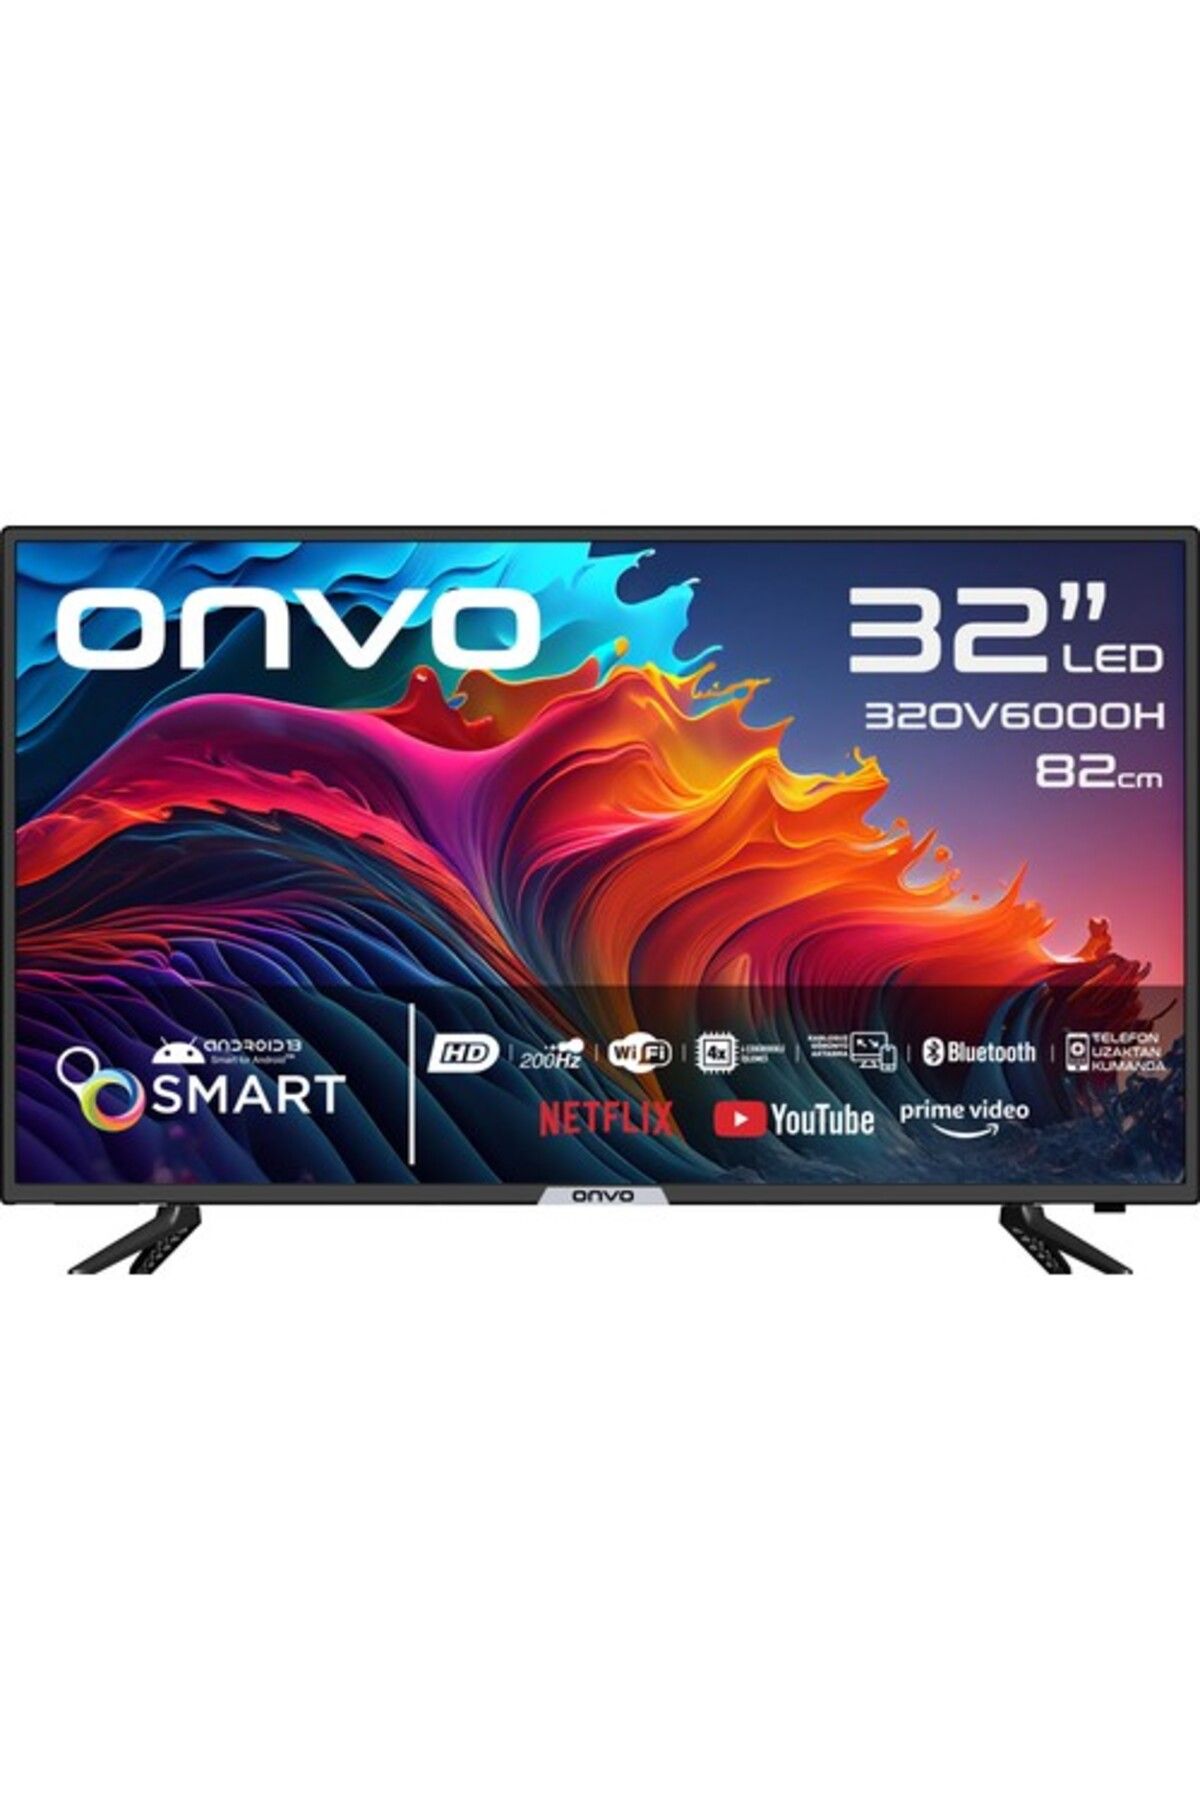 ONVO 32OV6000H 32" Hd Ready Android Smart Led Tv